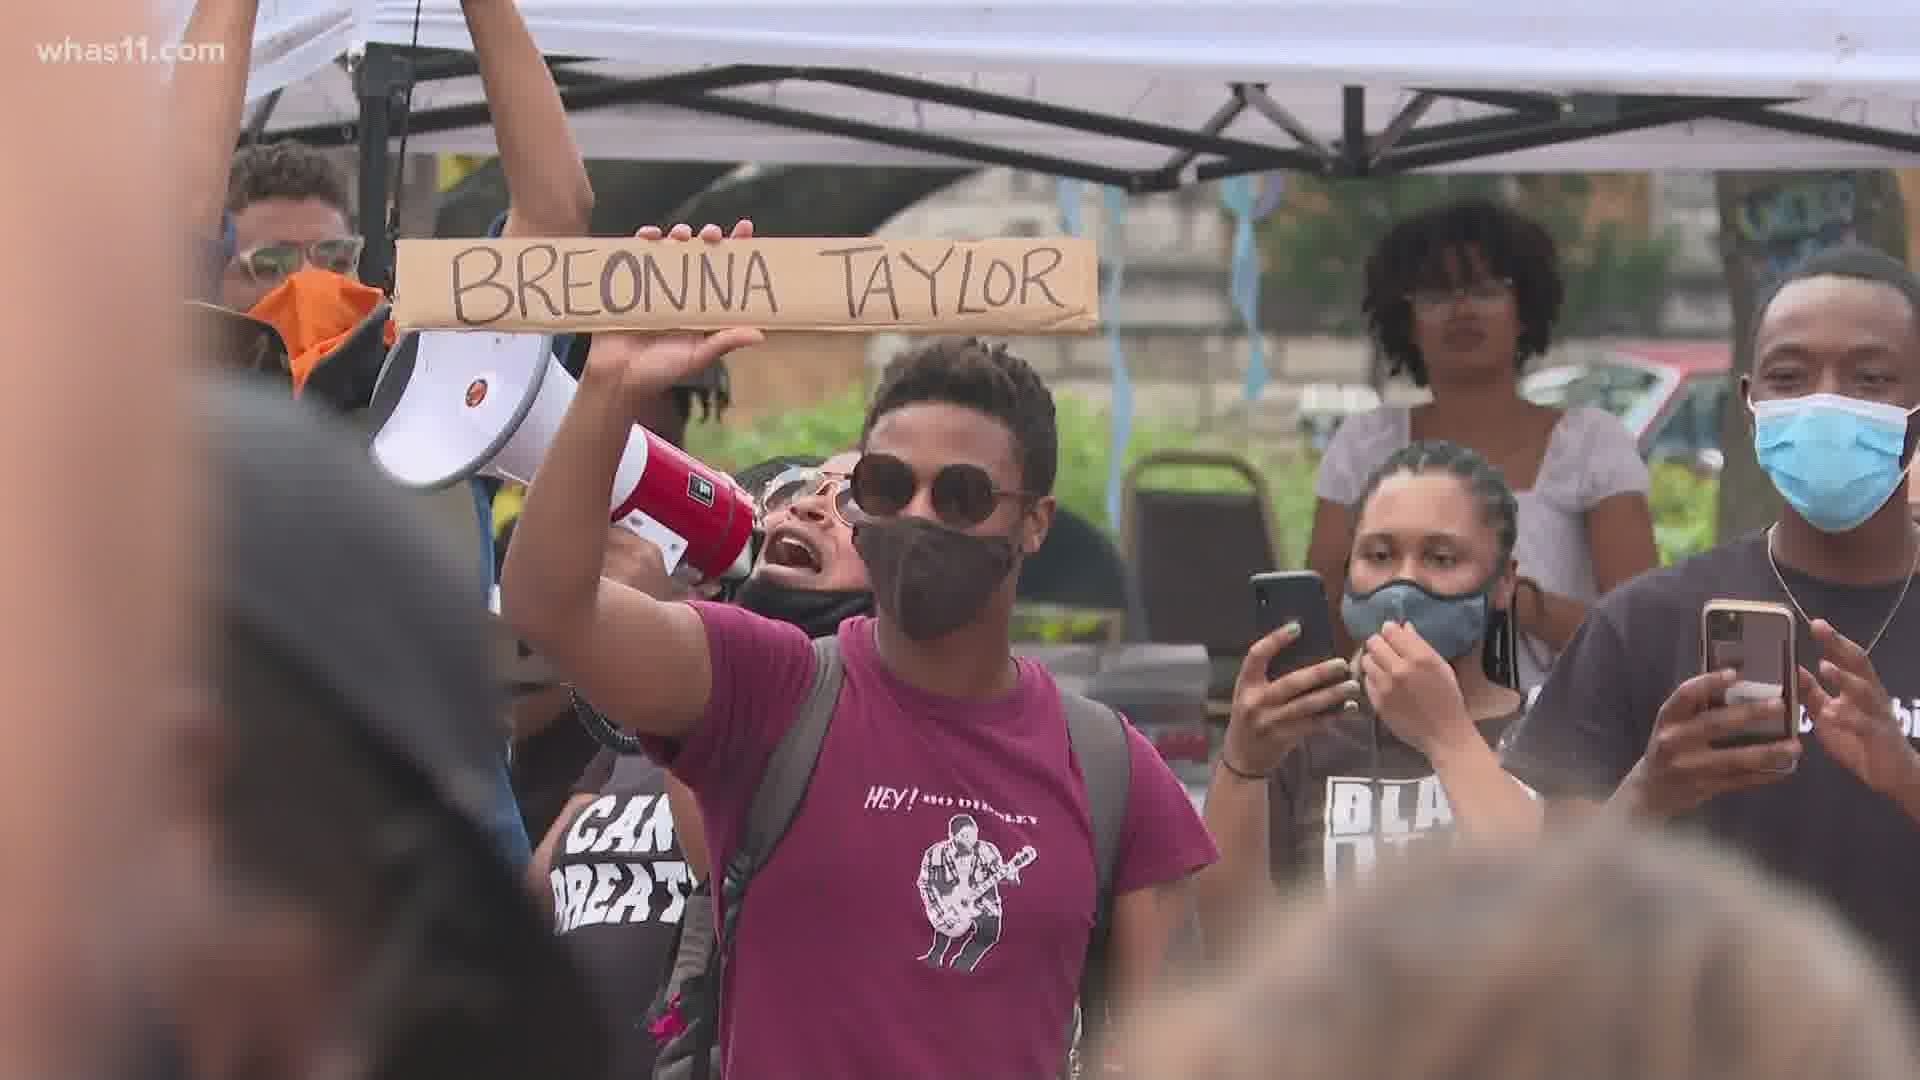 A group from Atlanta, Georgia traveled to Louisville to rally in Breonna Taylor's name.